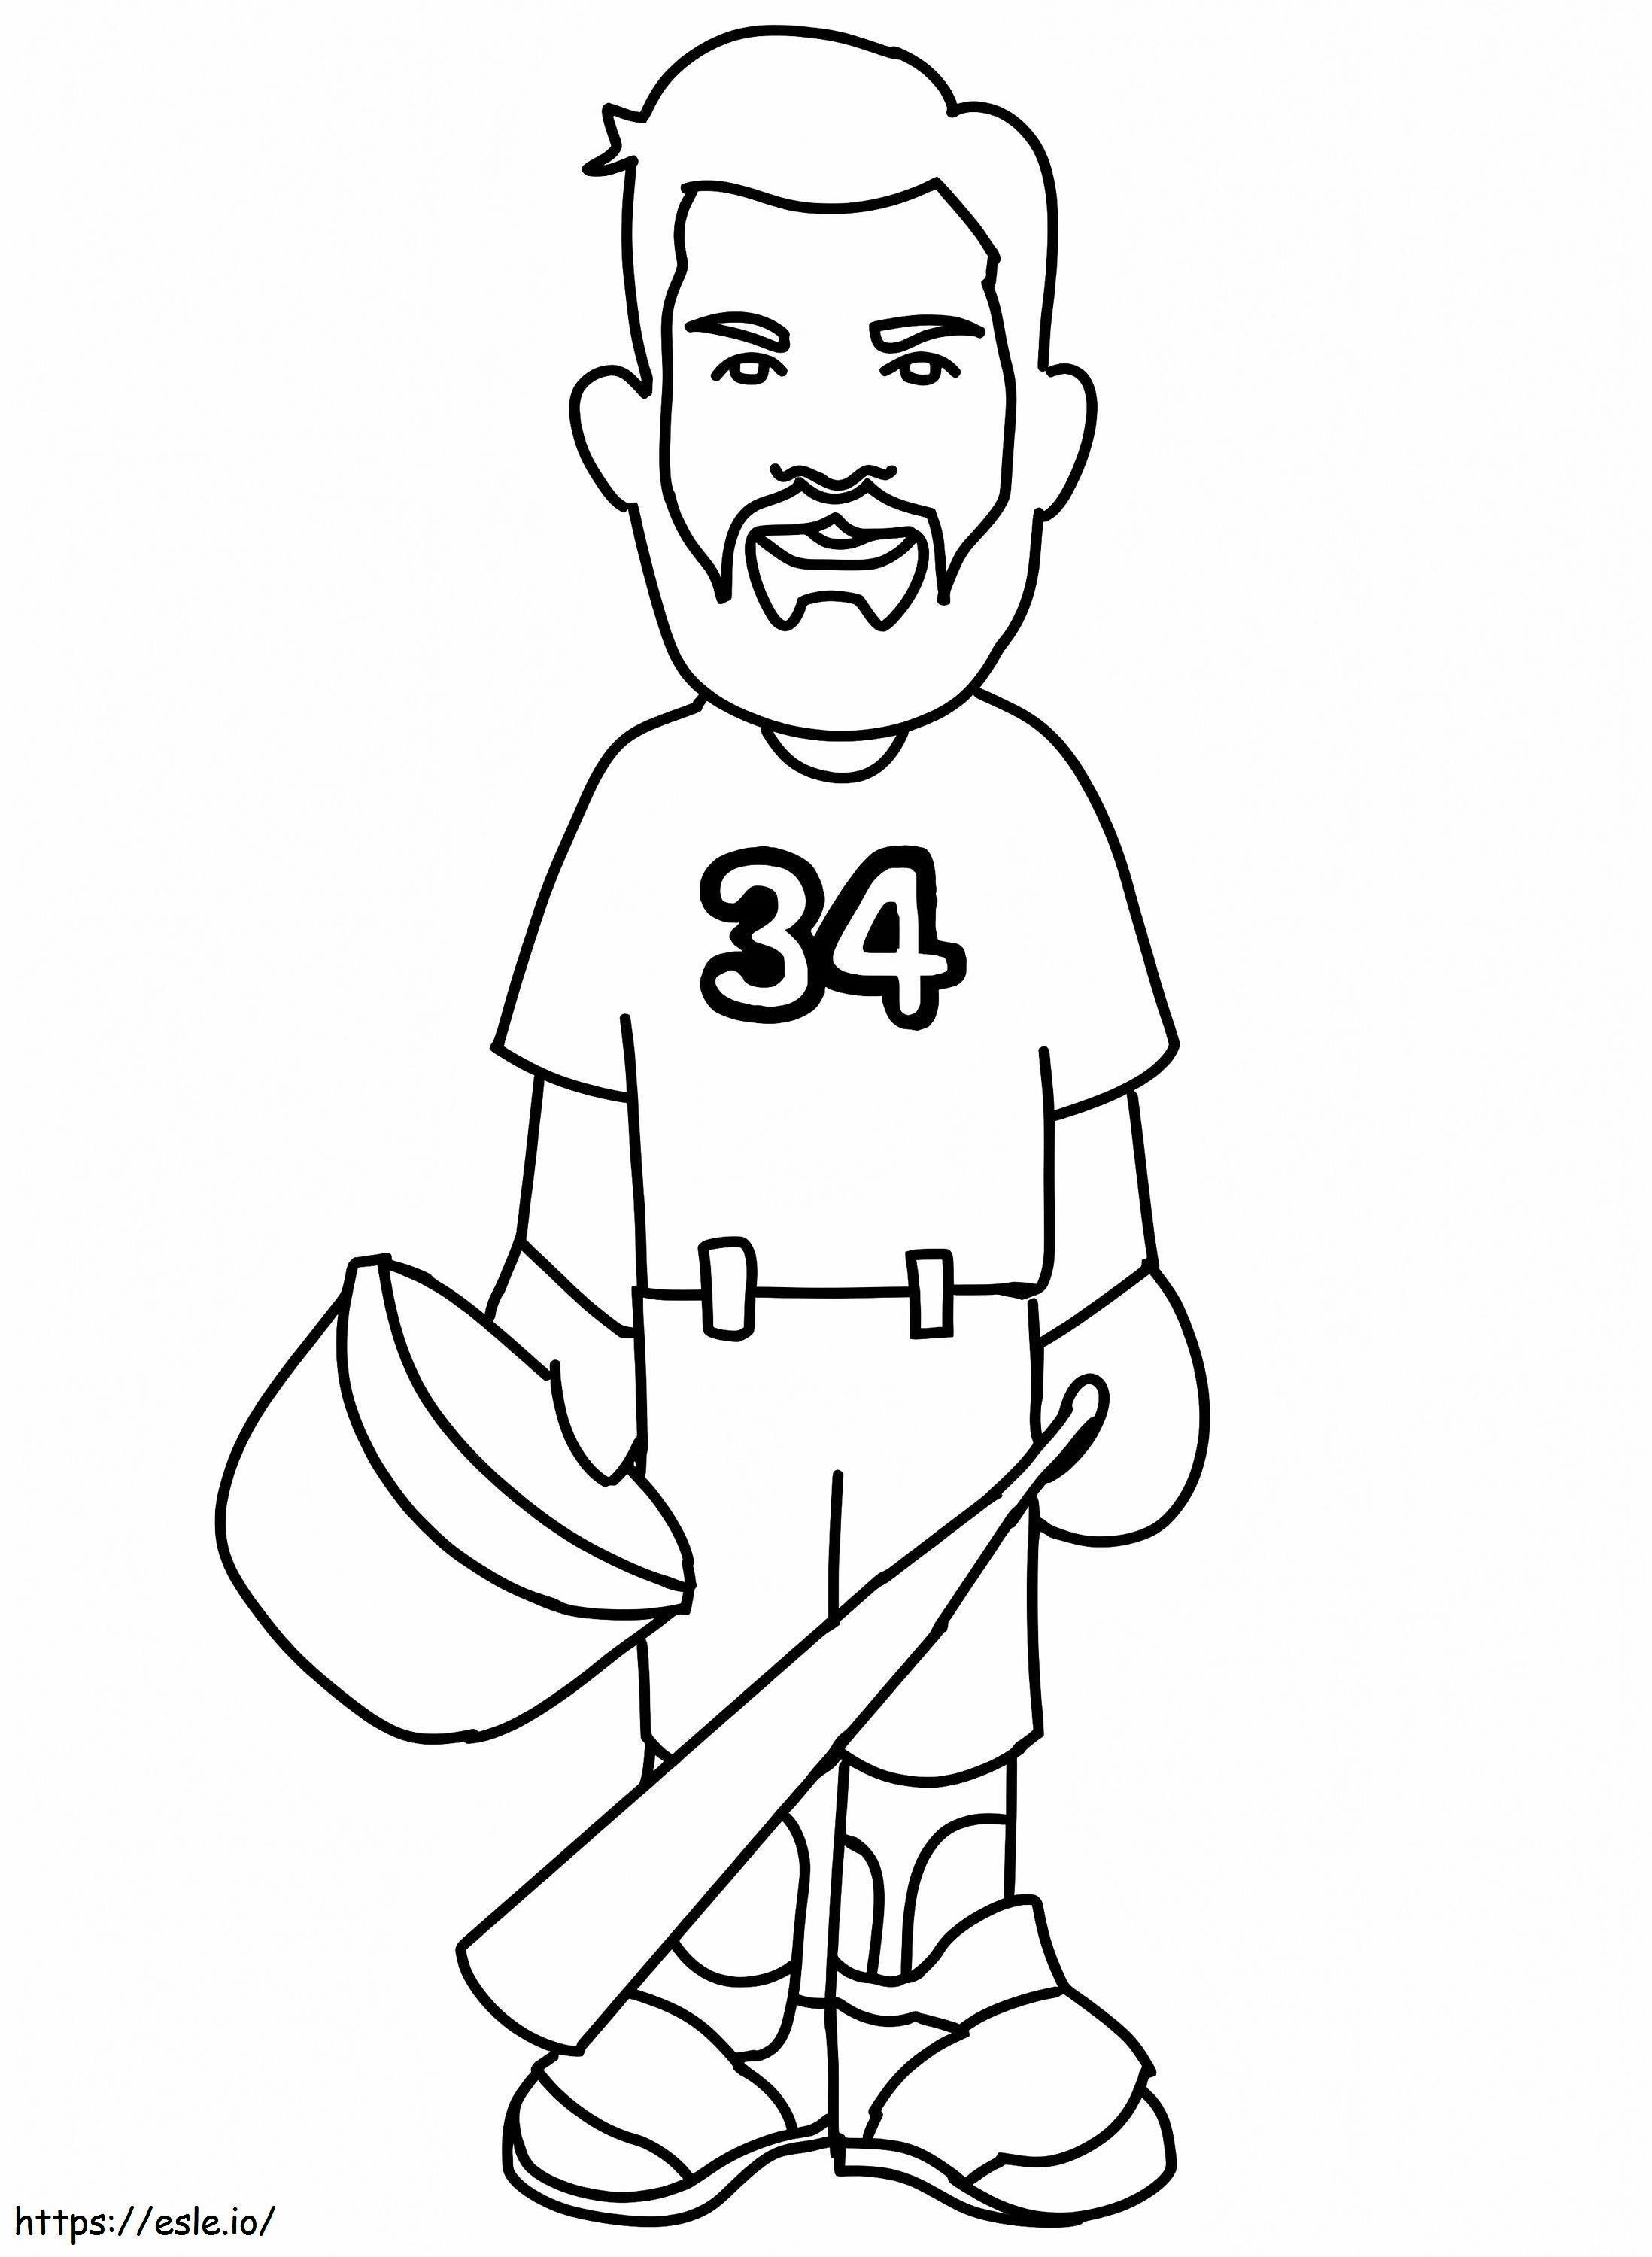 Little Bryce Harper coloring page